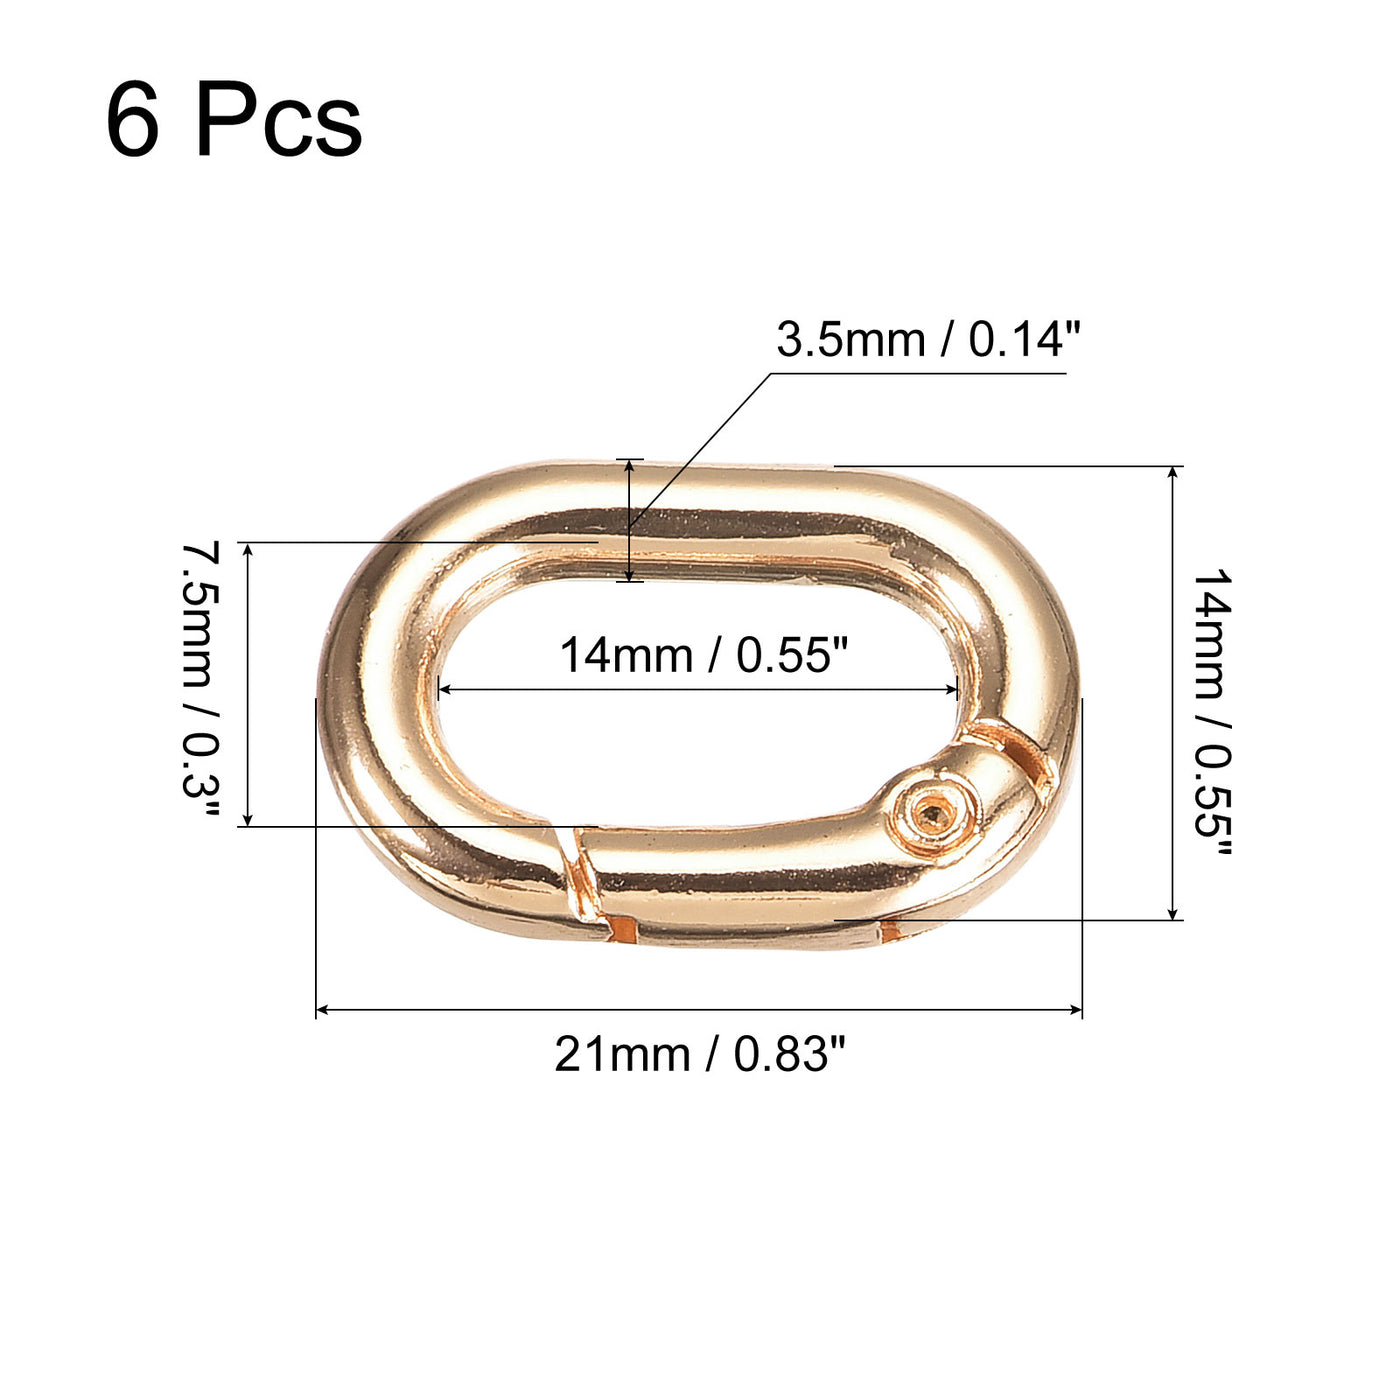 uxcell Uxcell 0.83" Spring Oval Ring Snap Clip Trigger for Bag Purse Keychain, 6Pcs Gold